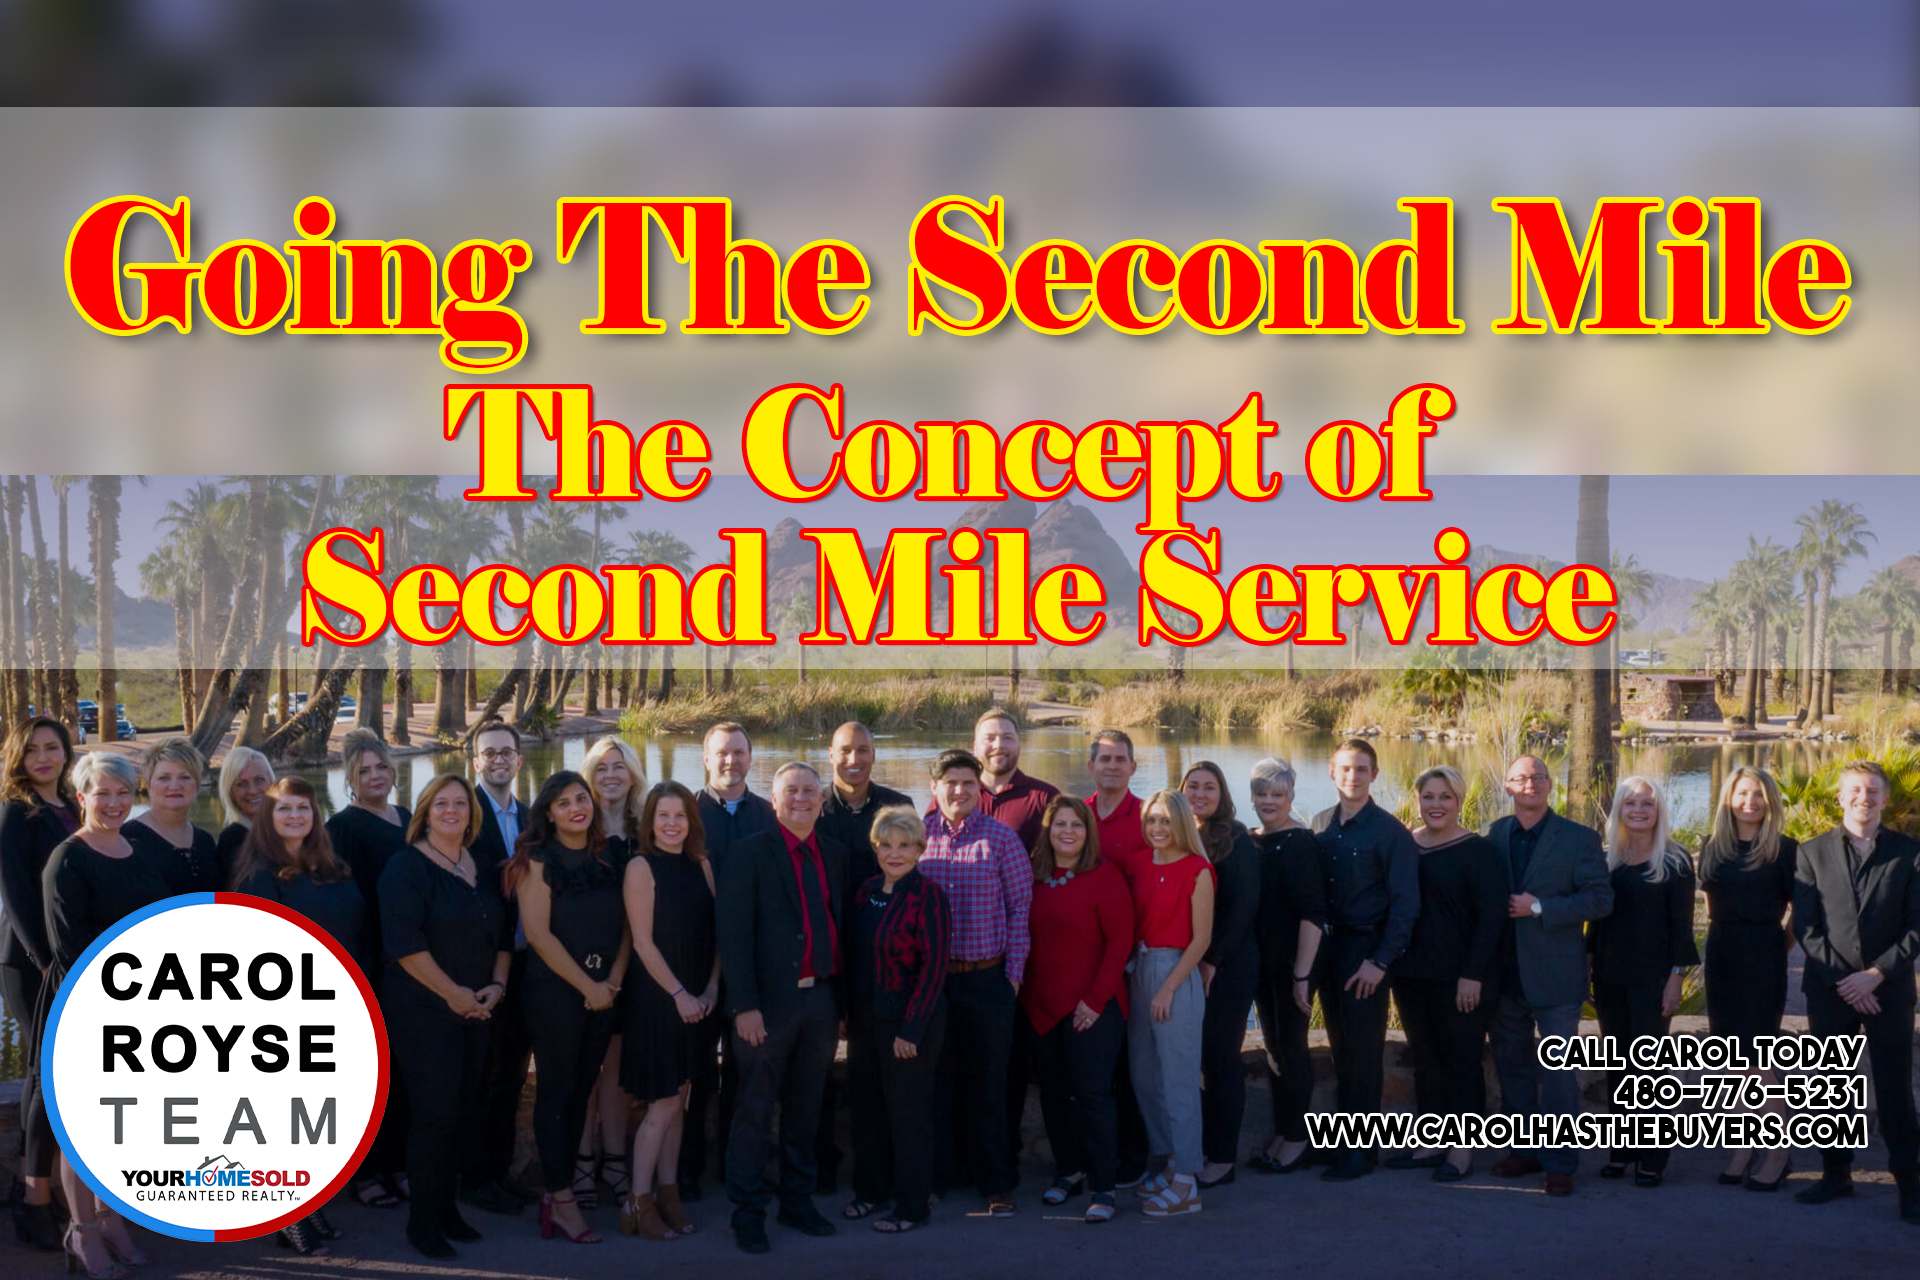 Going The Second Mile: The Concept of Second Mile Service